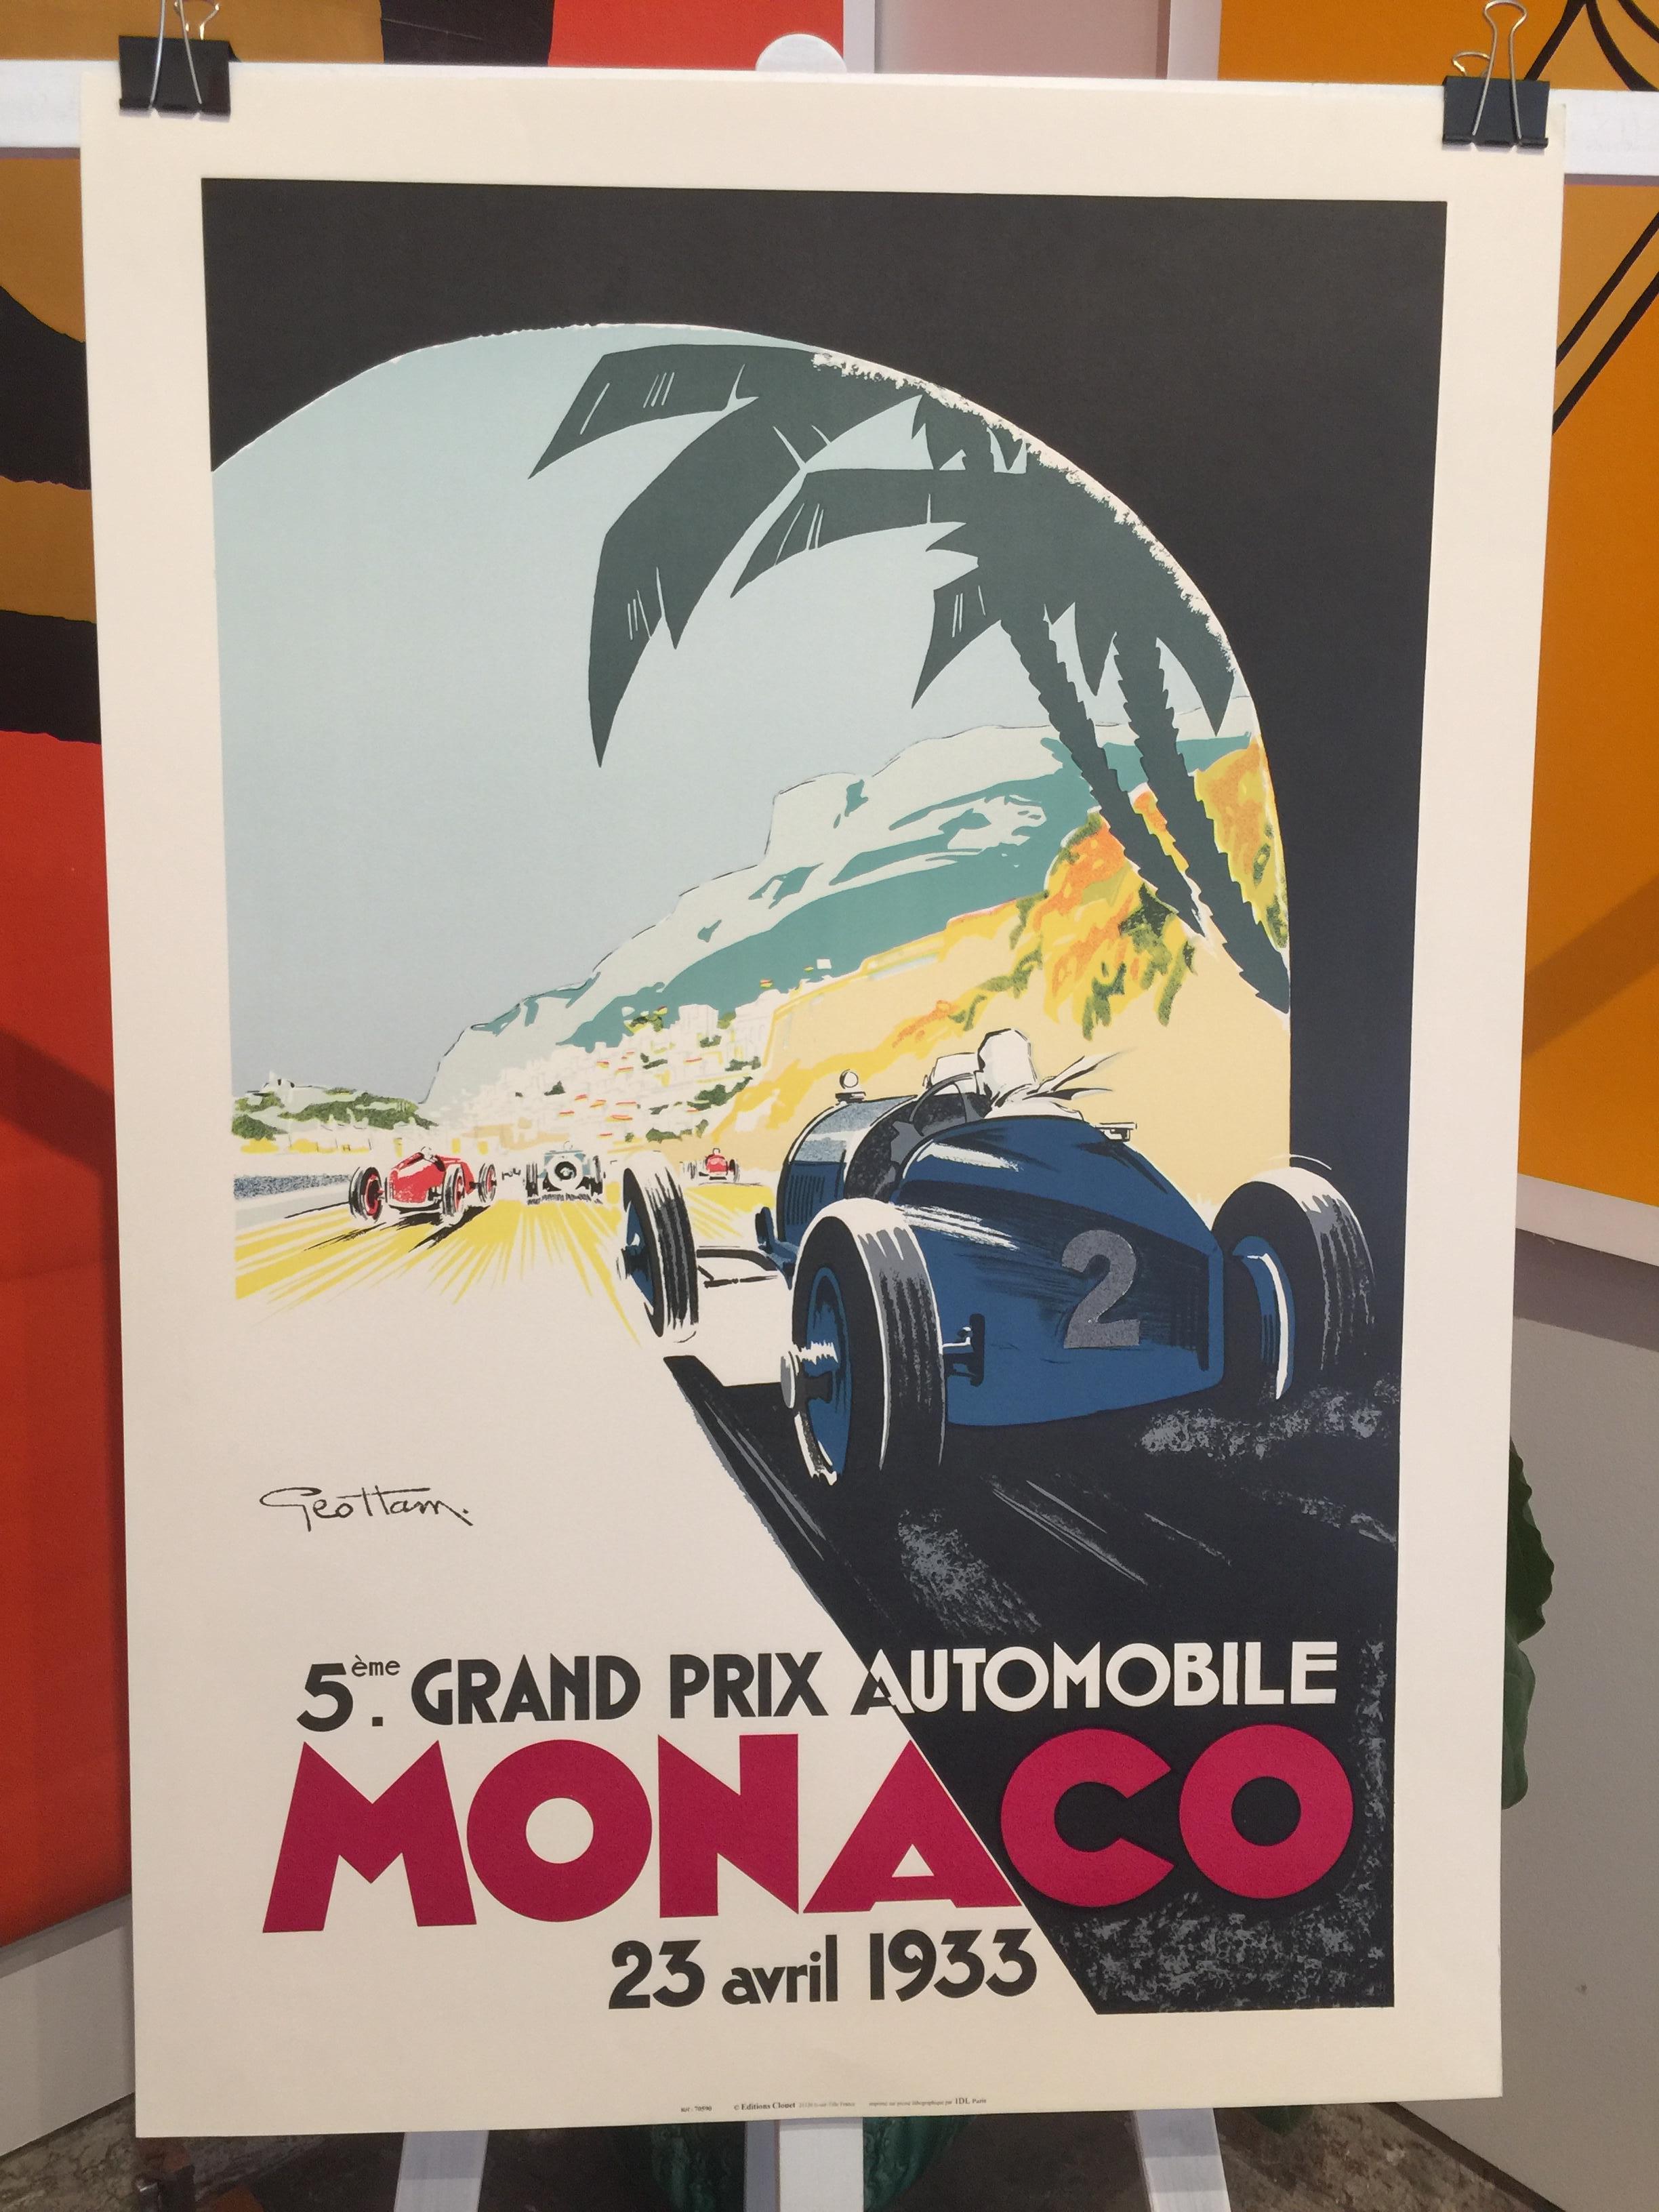 Authorized edition vintage Monaco Grand Prix car poster by Geo Ham, 1933

This poster is advertising the Grand Prix 

Printed by IDL, Paris, circa 1980
Size: 27 x 39 inch.

 